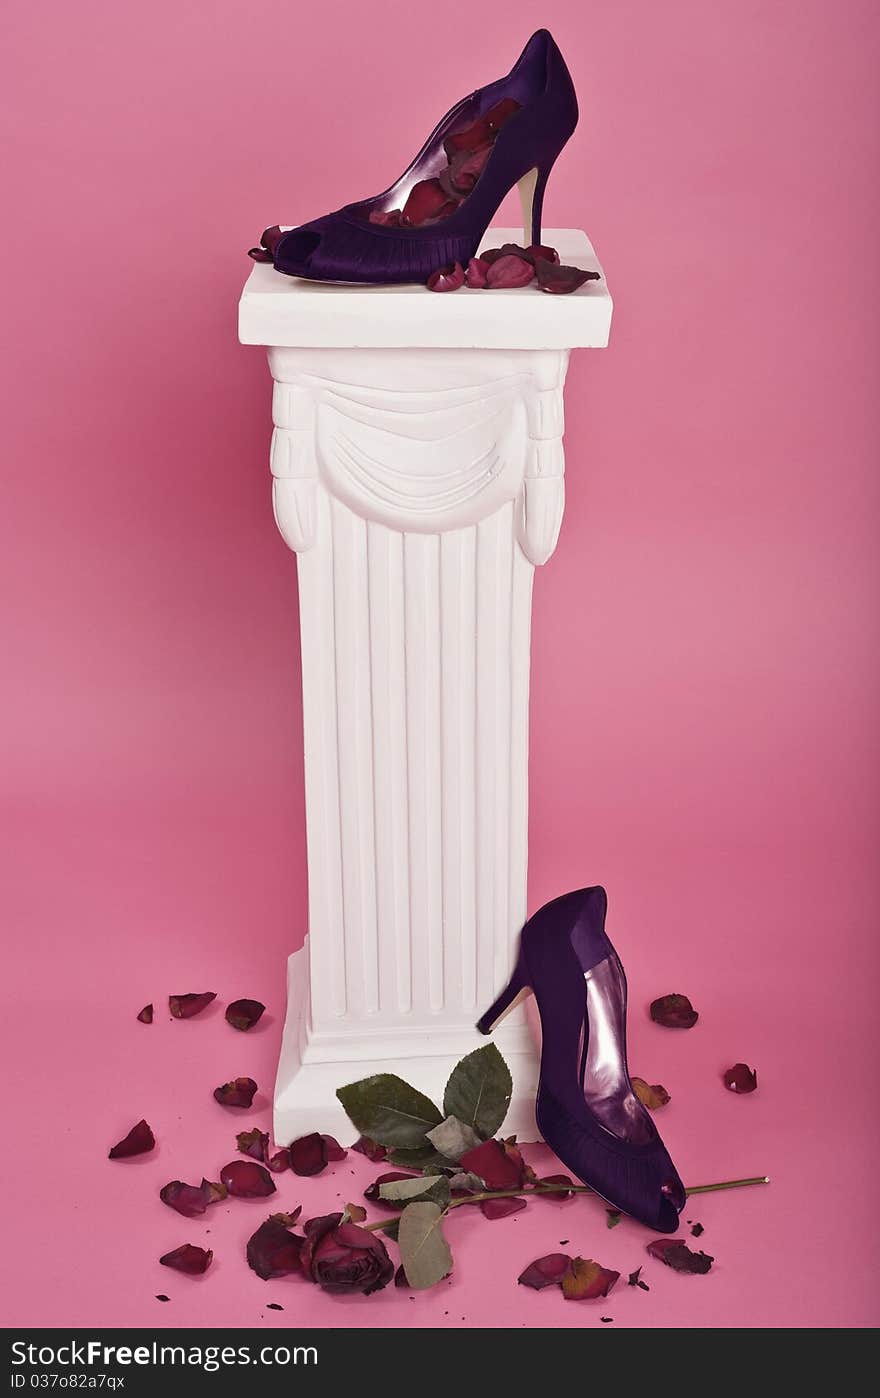 Purple high-heel shoes on pedestal with rose petals and a dying rose. Purple high-heel shoes on pedestal with rose petals and a dying rose